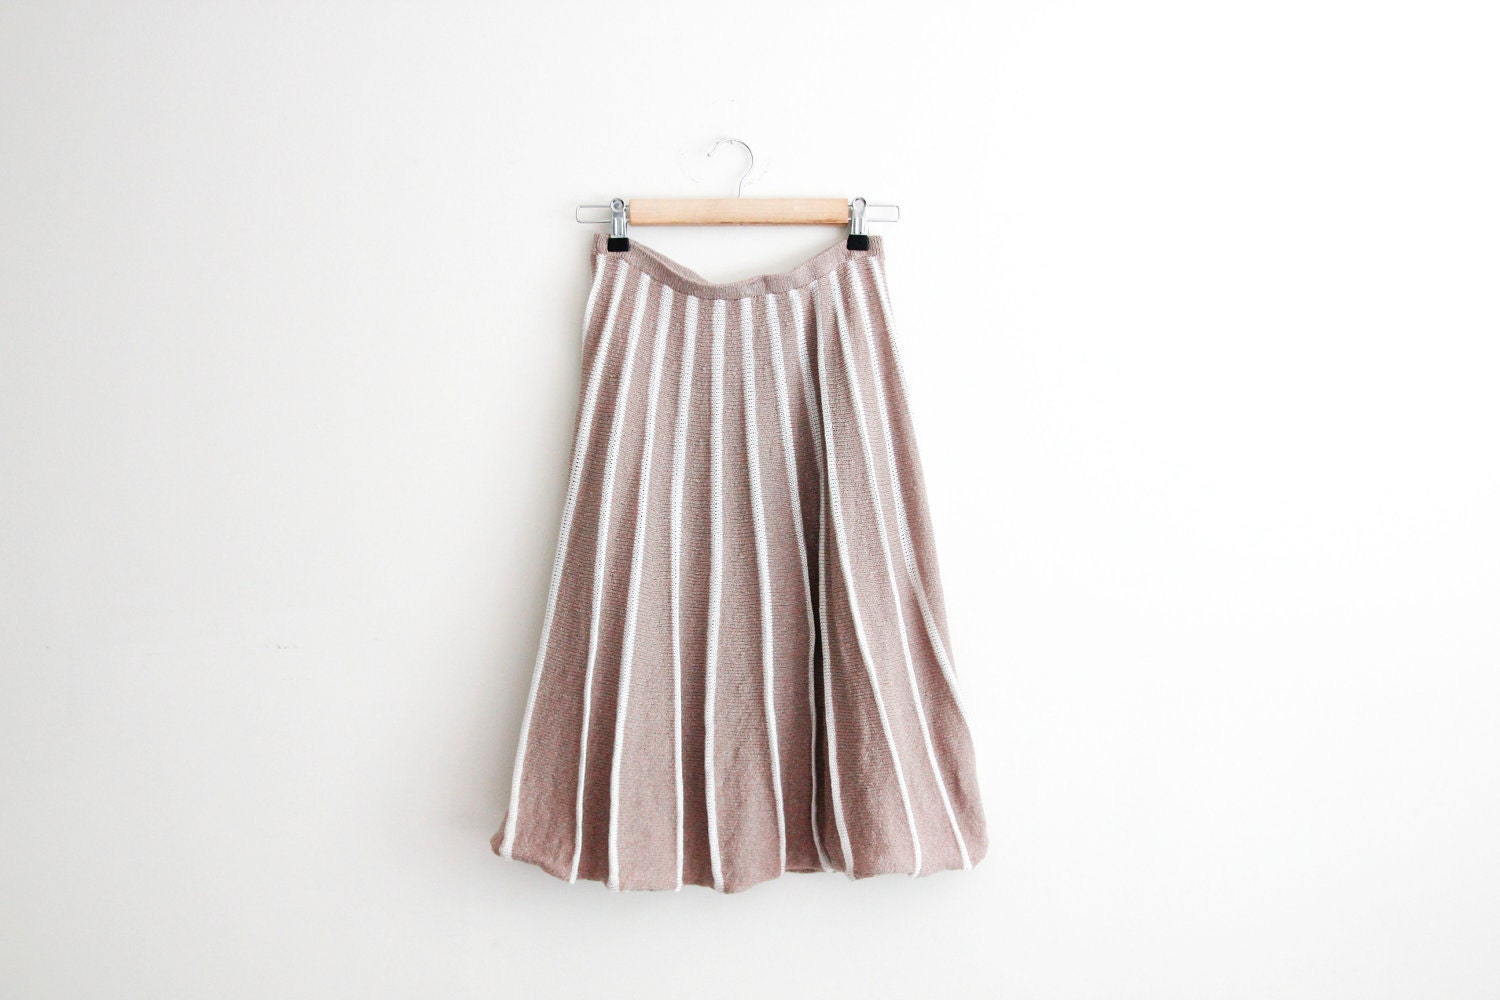 Coffee and cream sweater midi skirt // vintage 70s knit soft taupe skirt